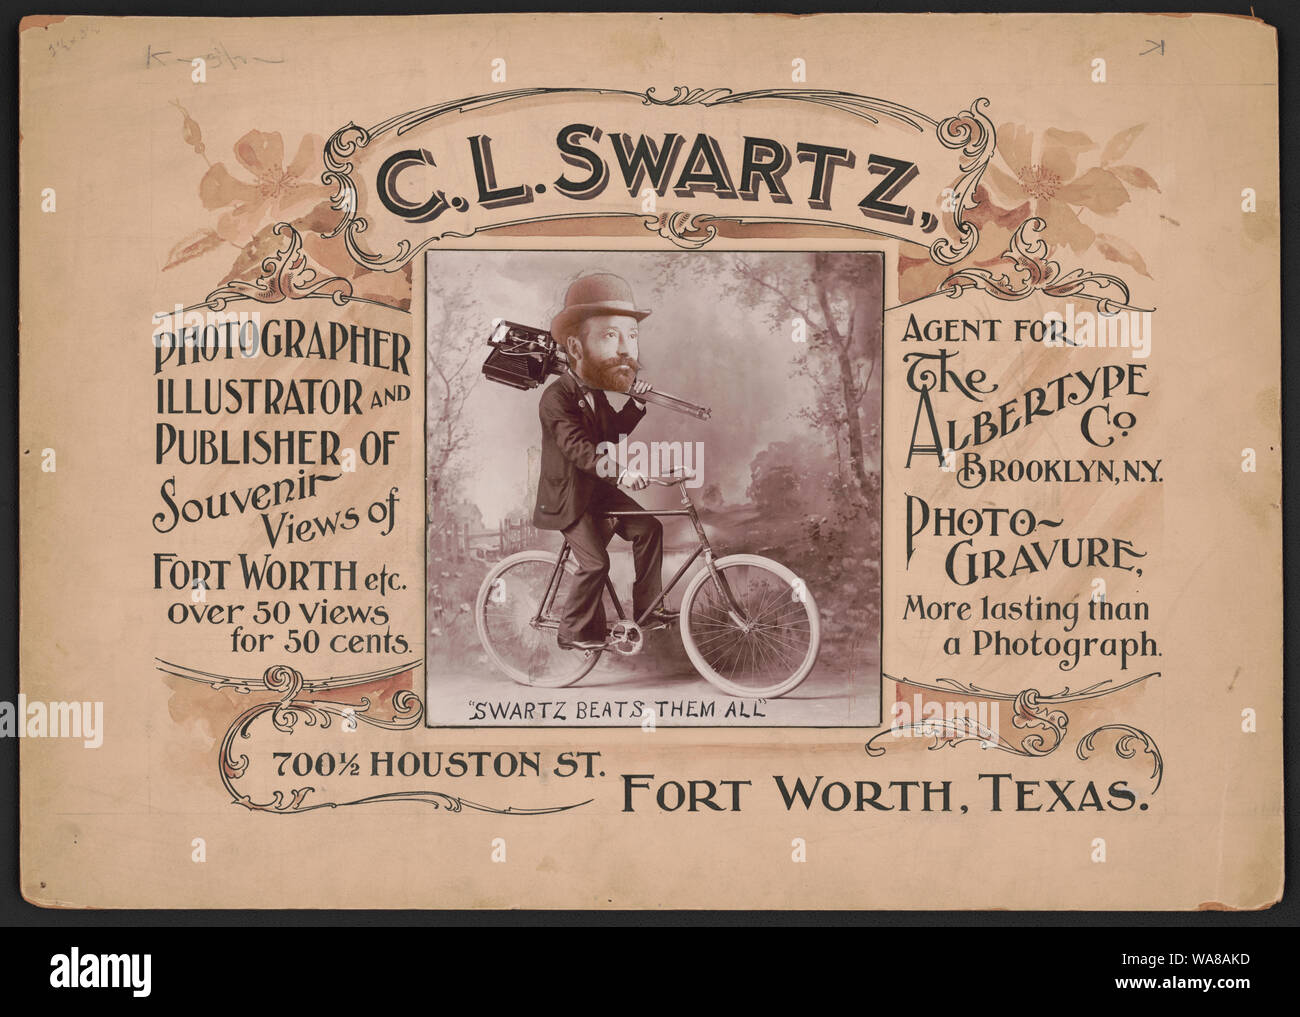 C.L. Swartz, photographer, illustrator and publisher of souvenir views of Fort Worth, etc., over 50 views for 50 cents ... Stock Photo